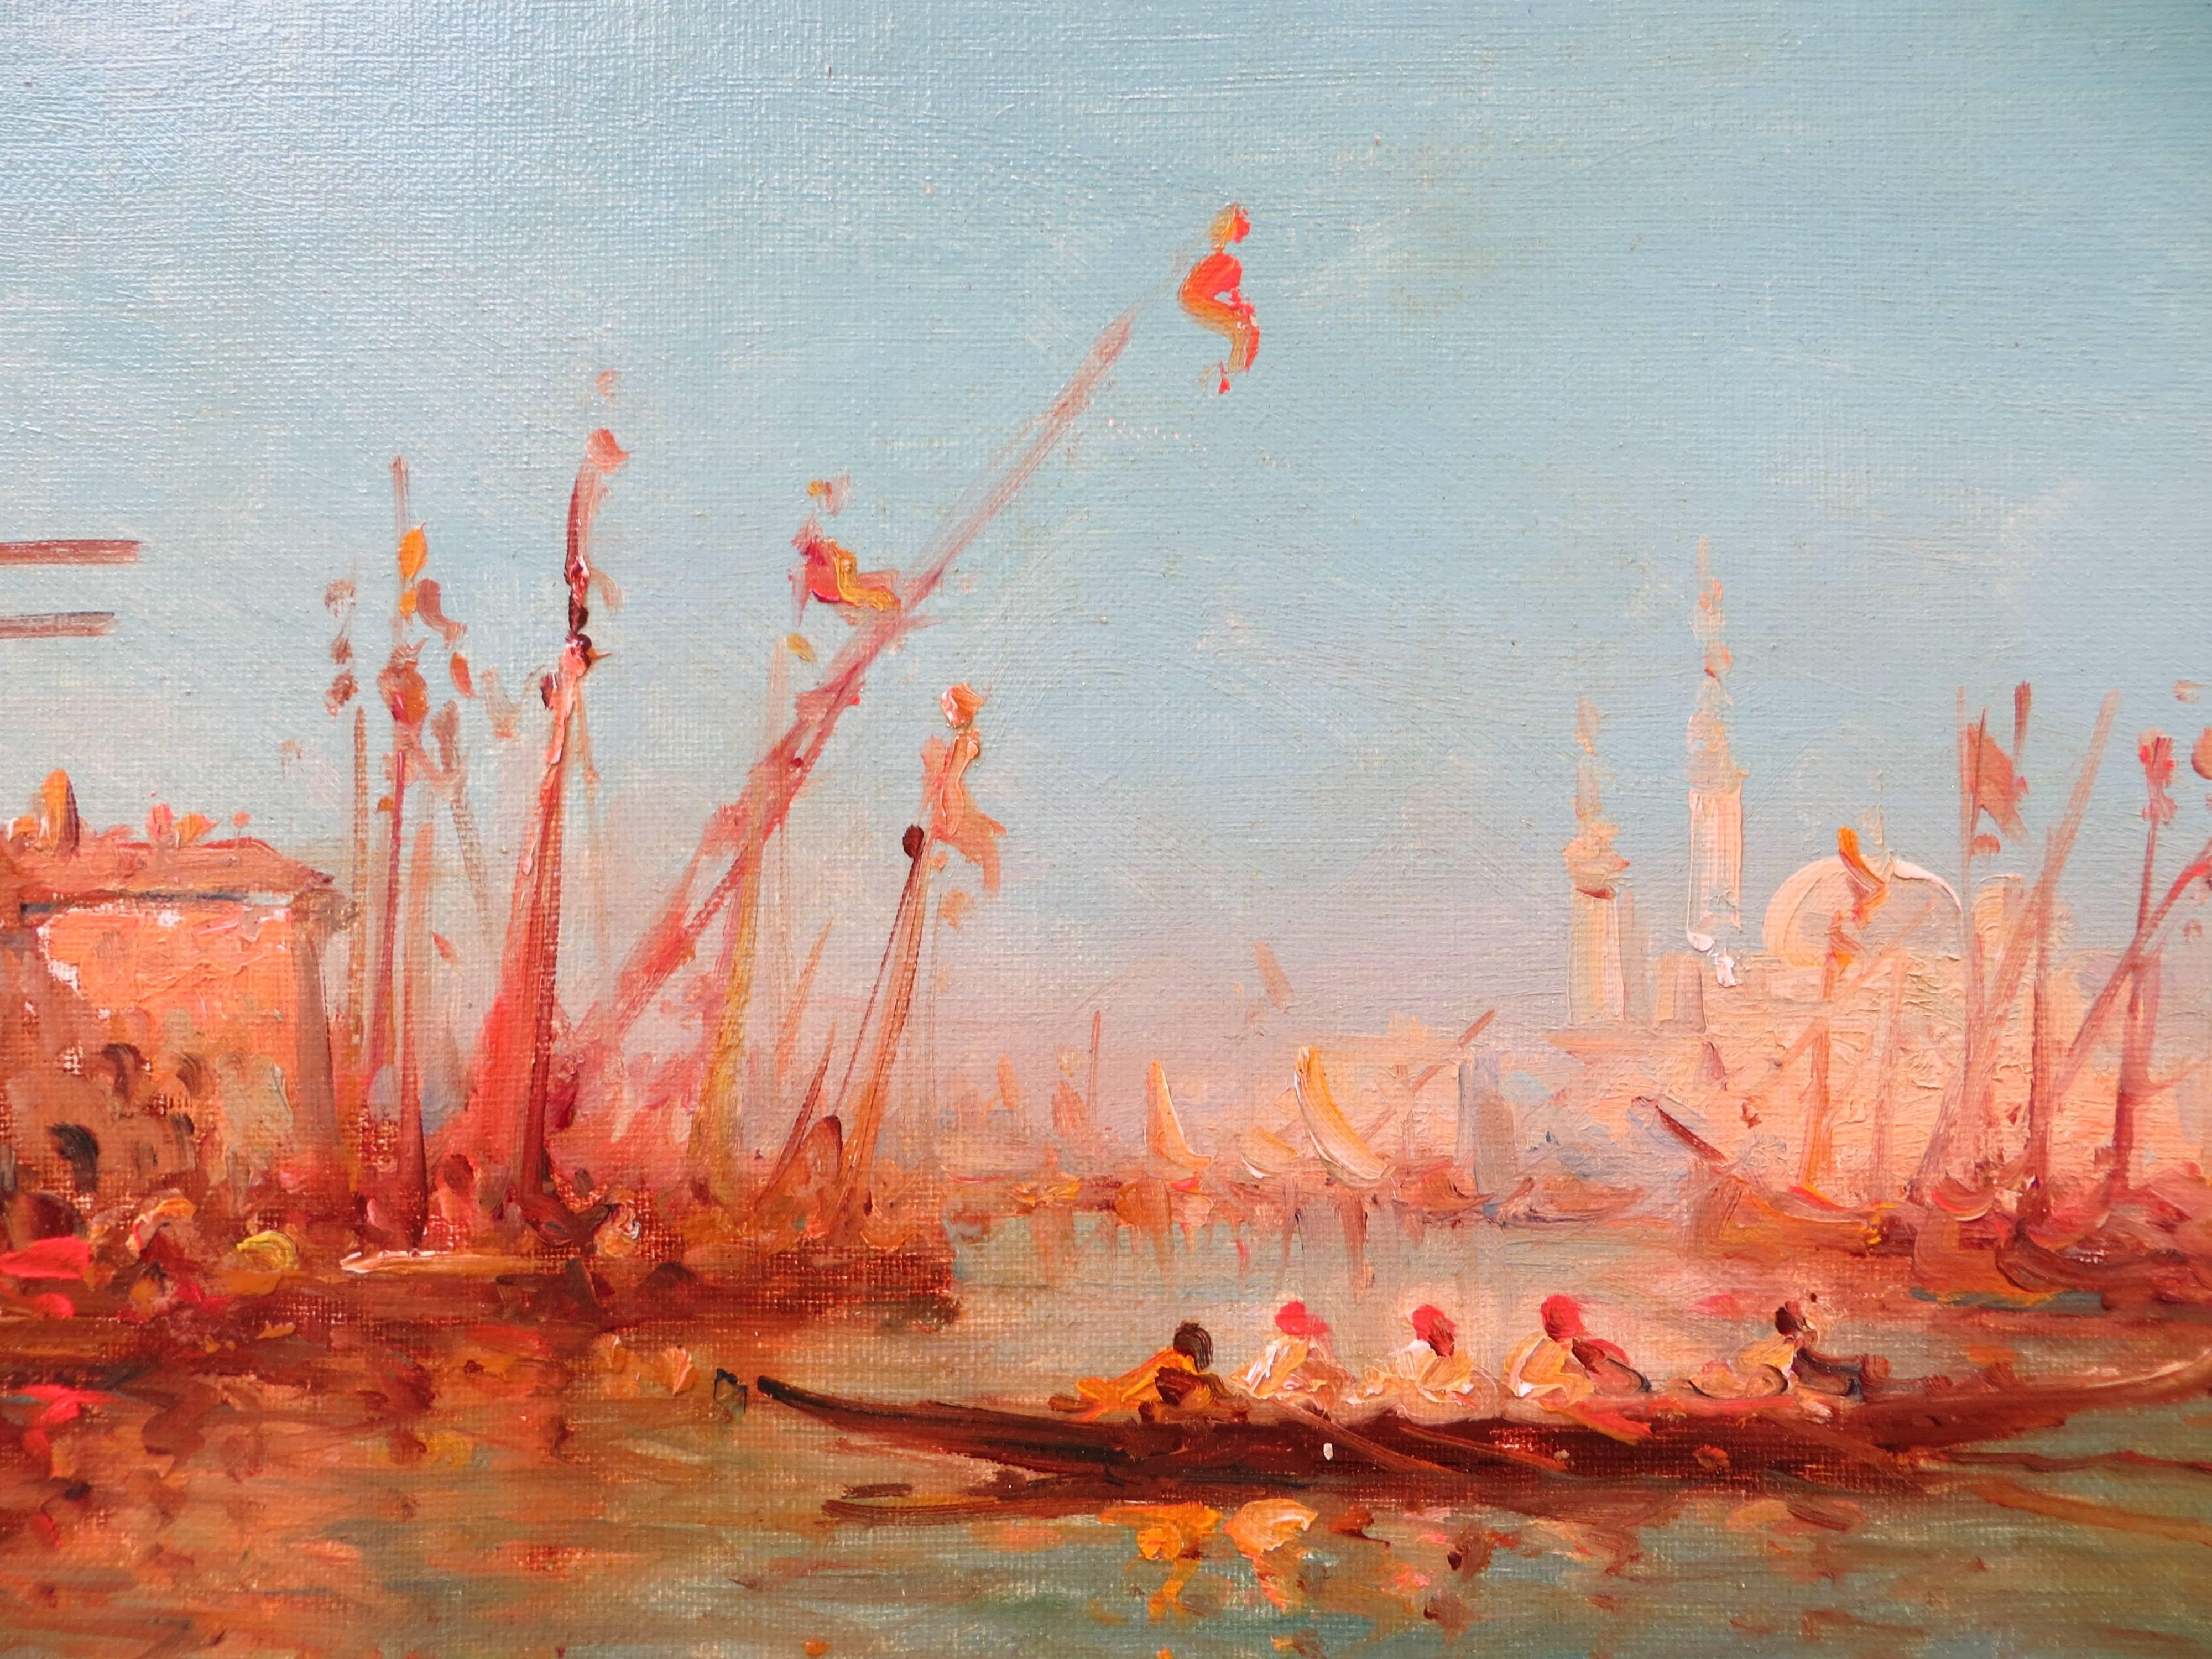 The Bosphorus by ZILLER  - Post-Impressionist Painting by Leopold Ziller